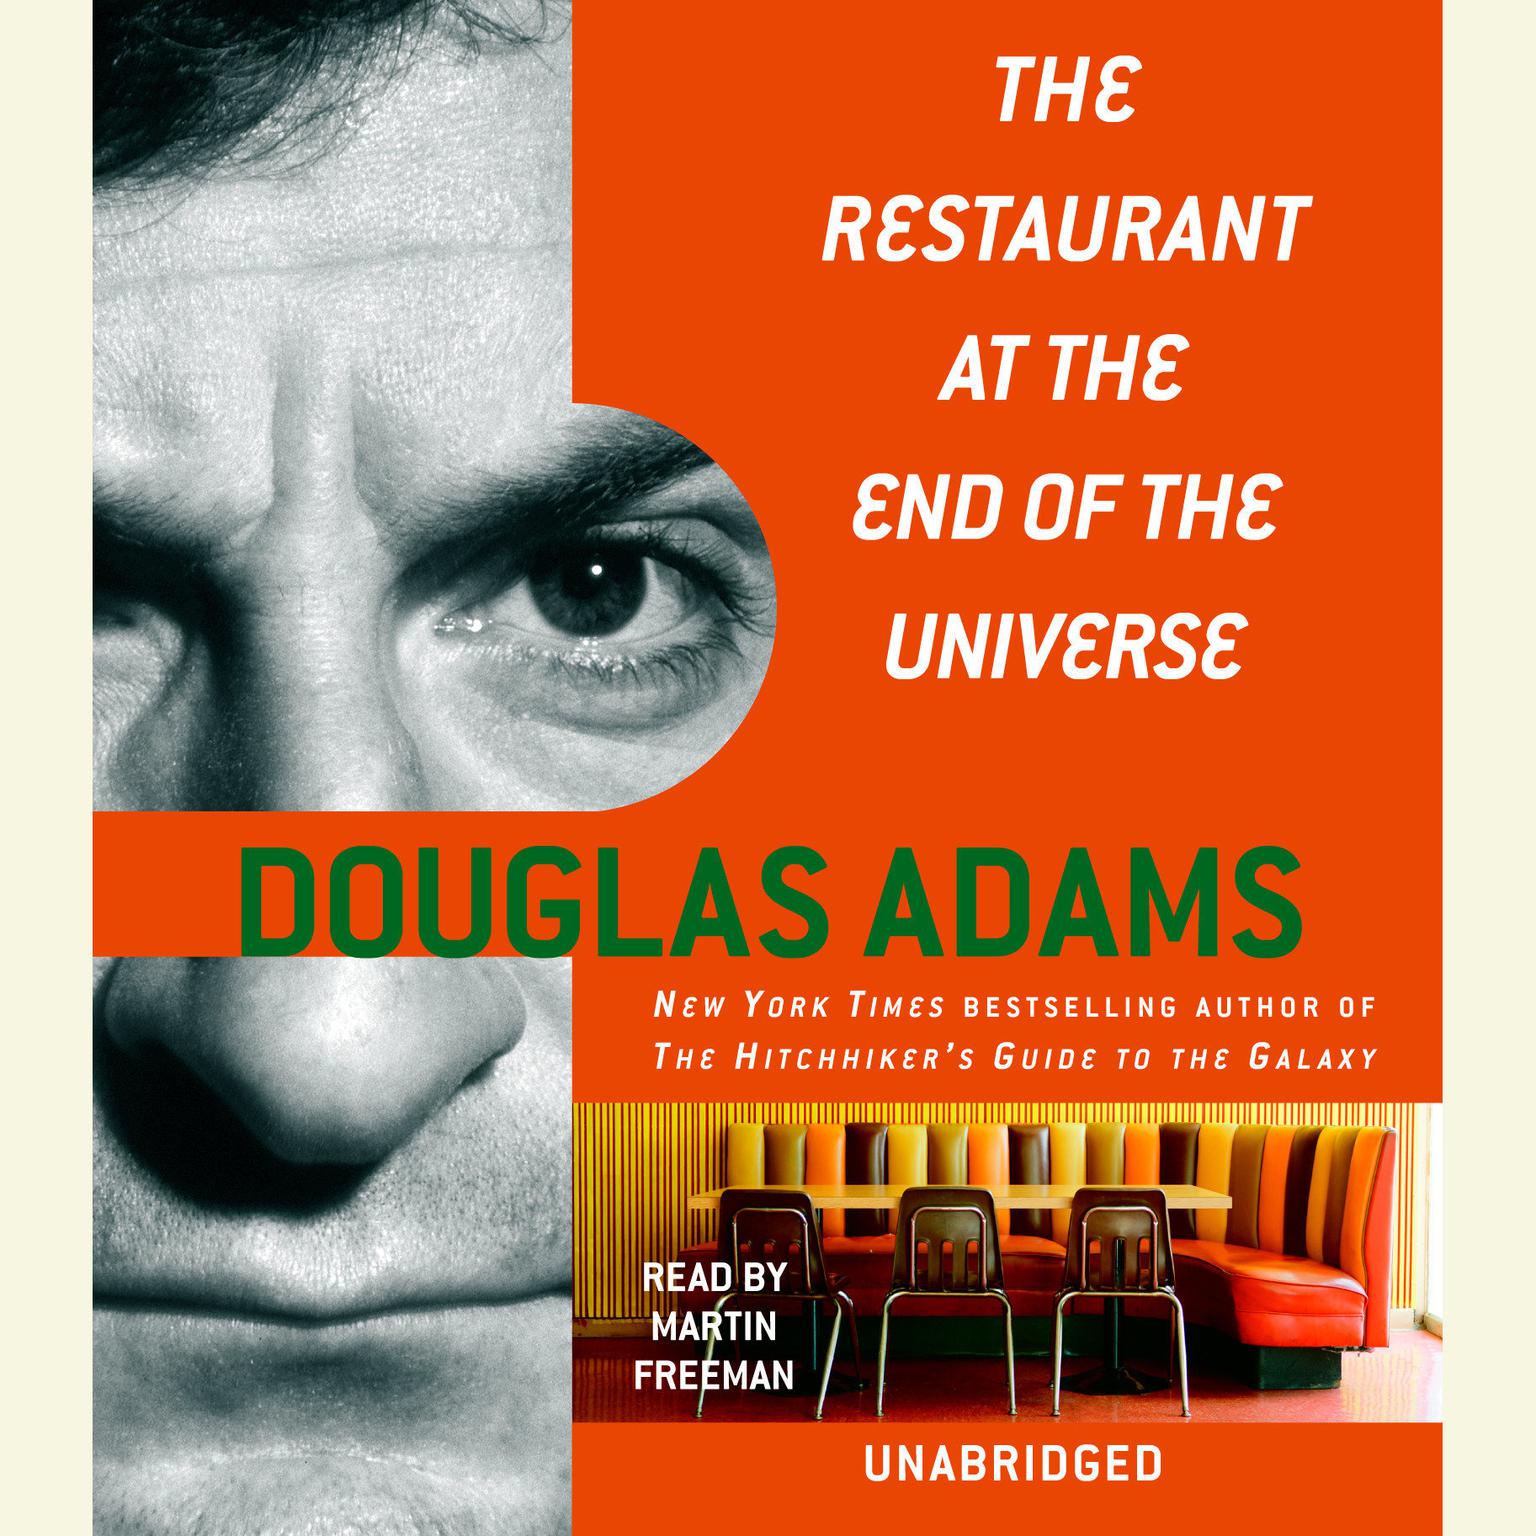 The Restaurant at the End of the Universe Audiobook, by Douglas Adams